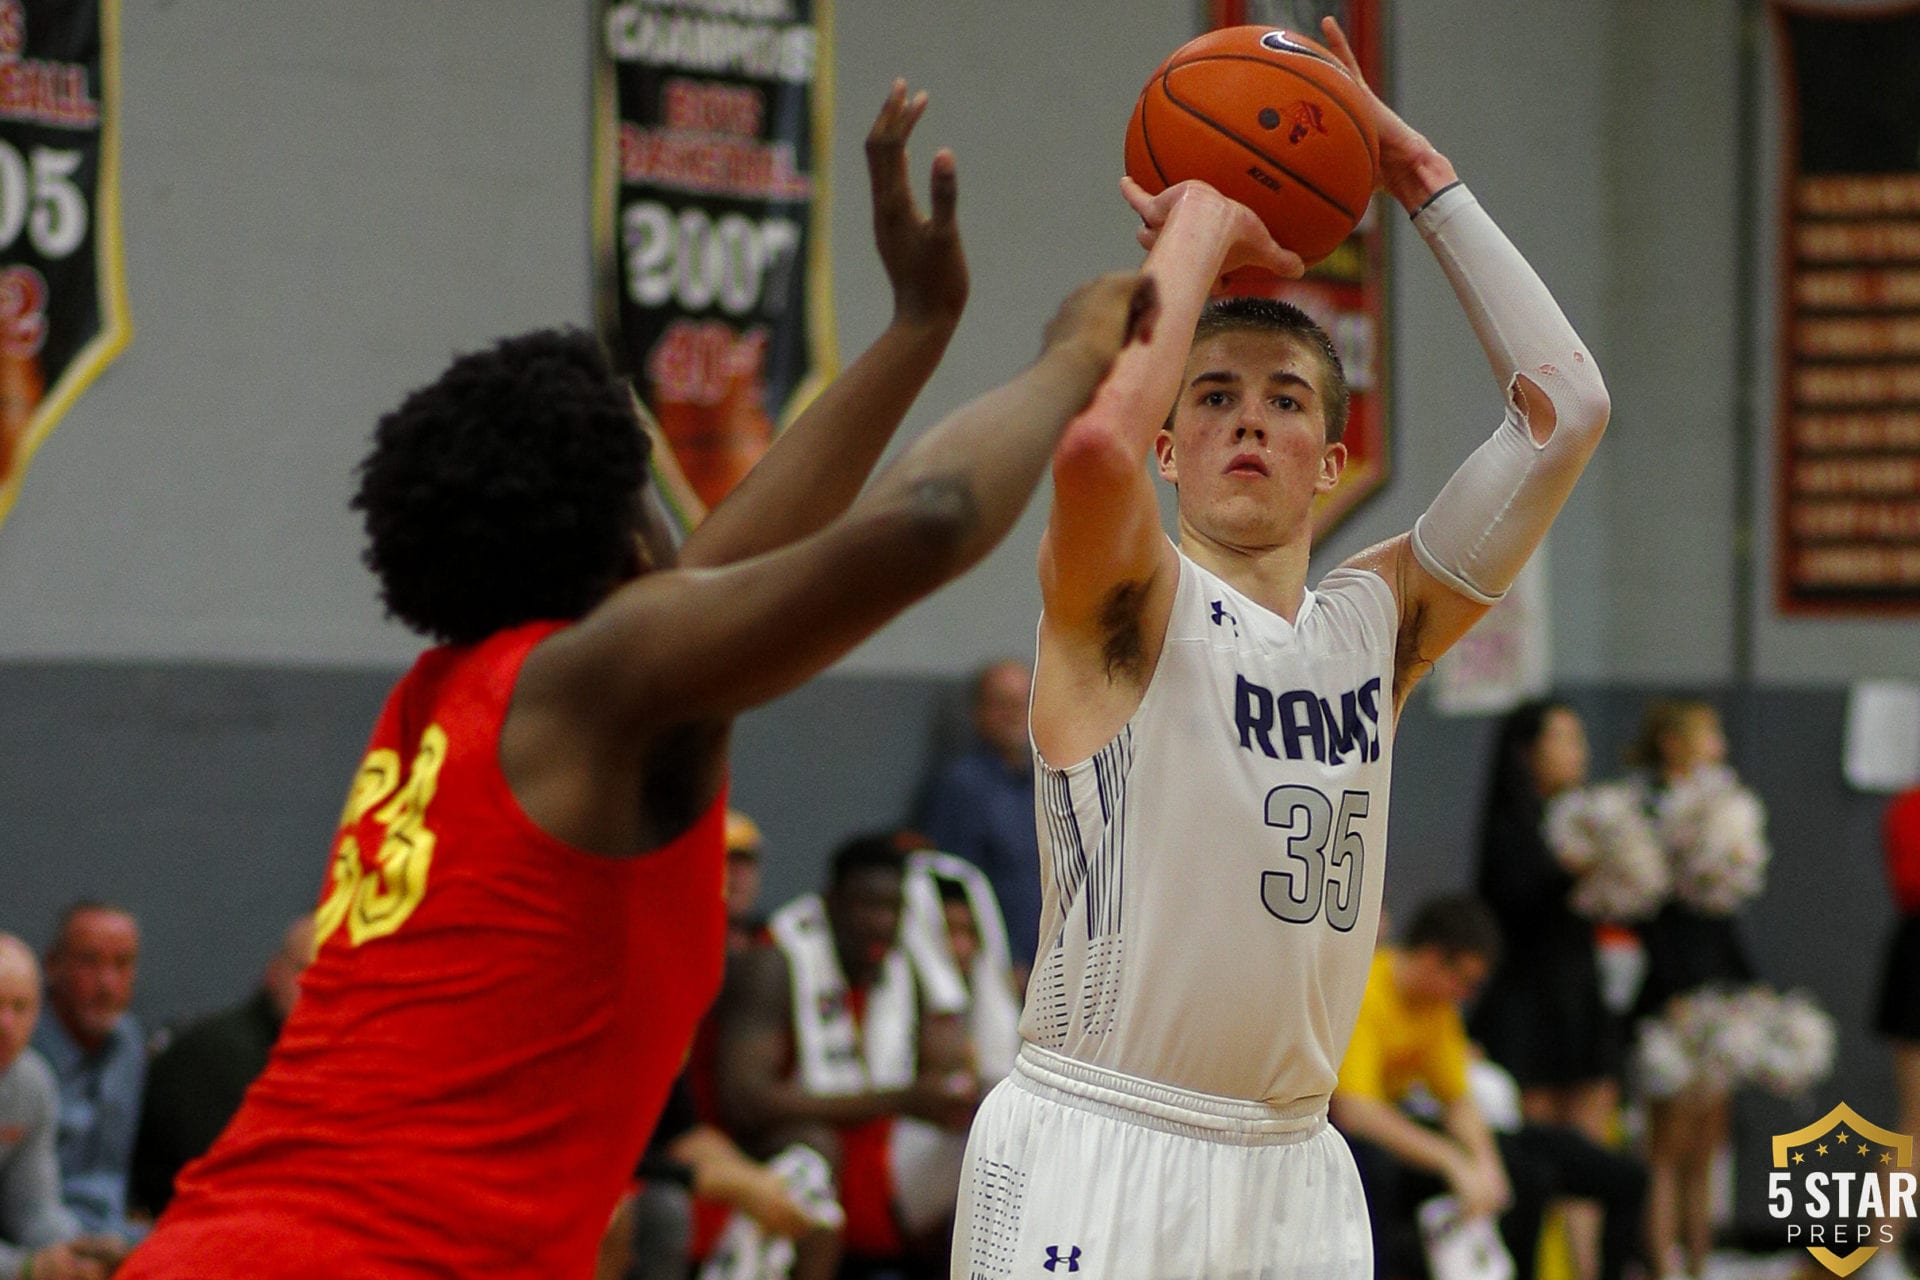 Grant Ledford of Grace Christian gets off his shot during the Rams' game at Oak Hill Academy. (Photo: Danny Parker).